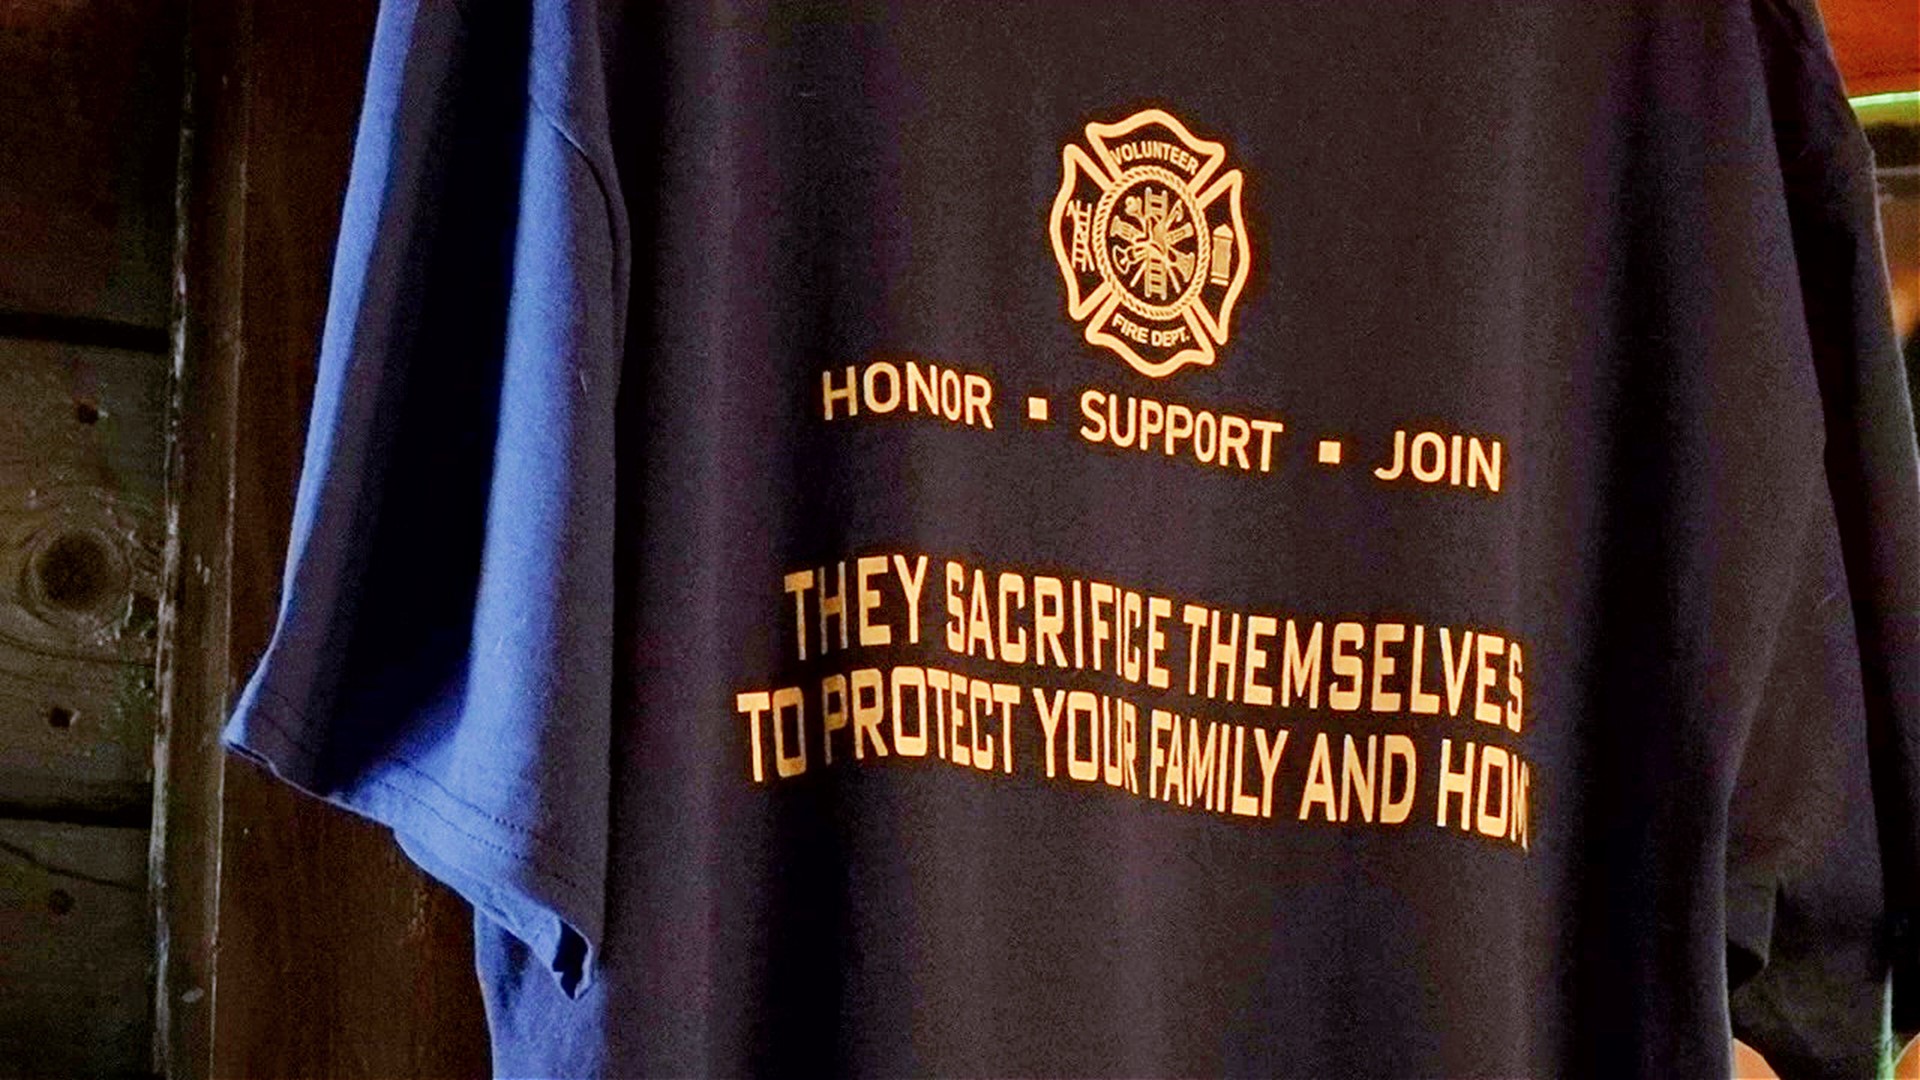 This year's march aims to celebrate more than Irish heritage. Organizers want to celebrate the lives of two volunteer firefighters killed in the line of duty.